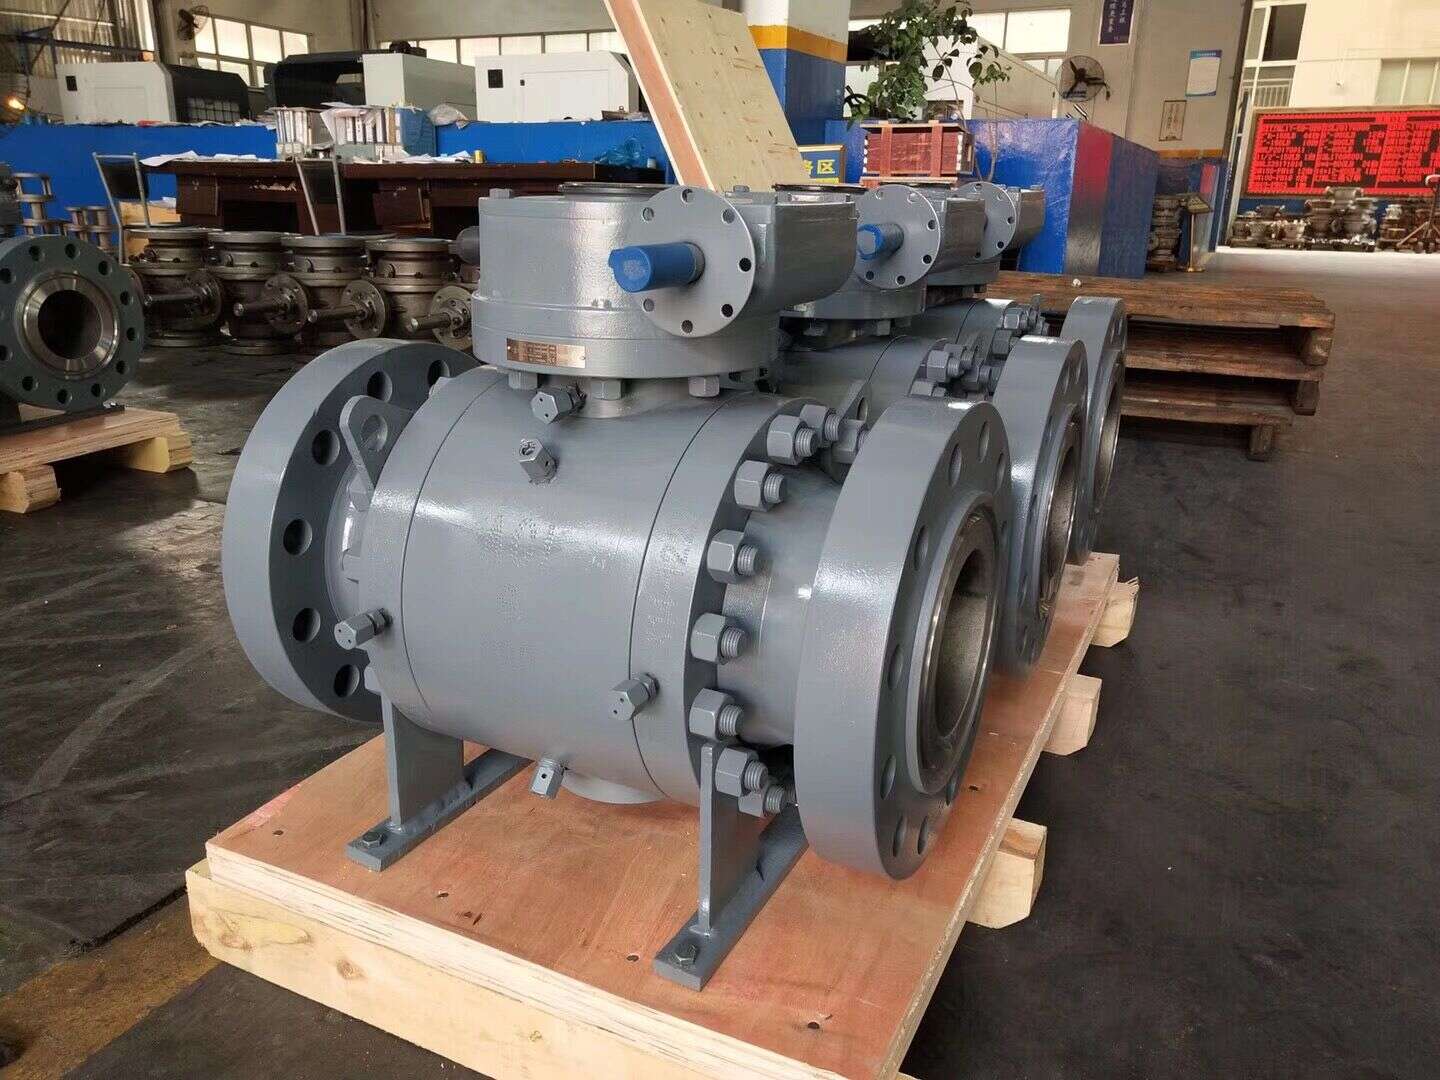 Fixed Ball Valves with Low Pressure Reliable Sealing, Measures 0.5 to 28 Inches